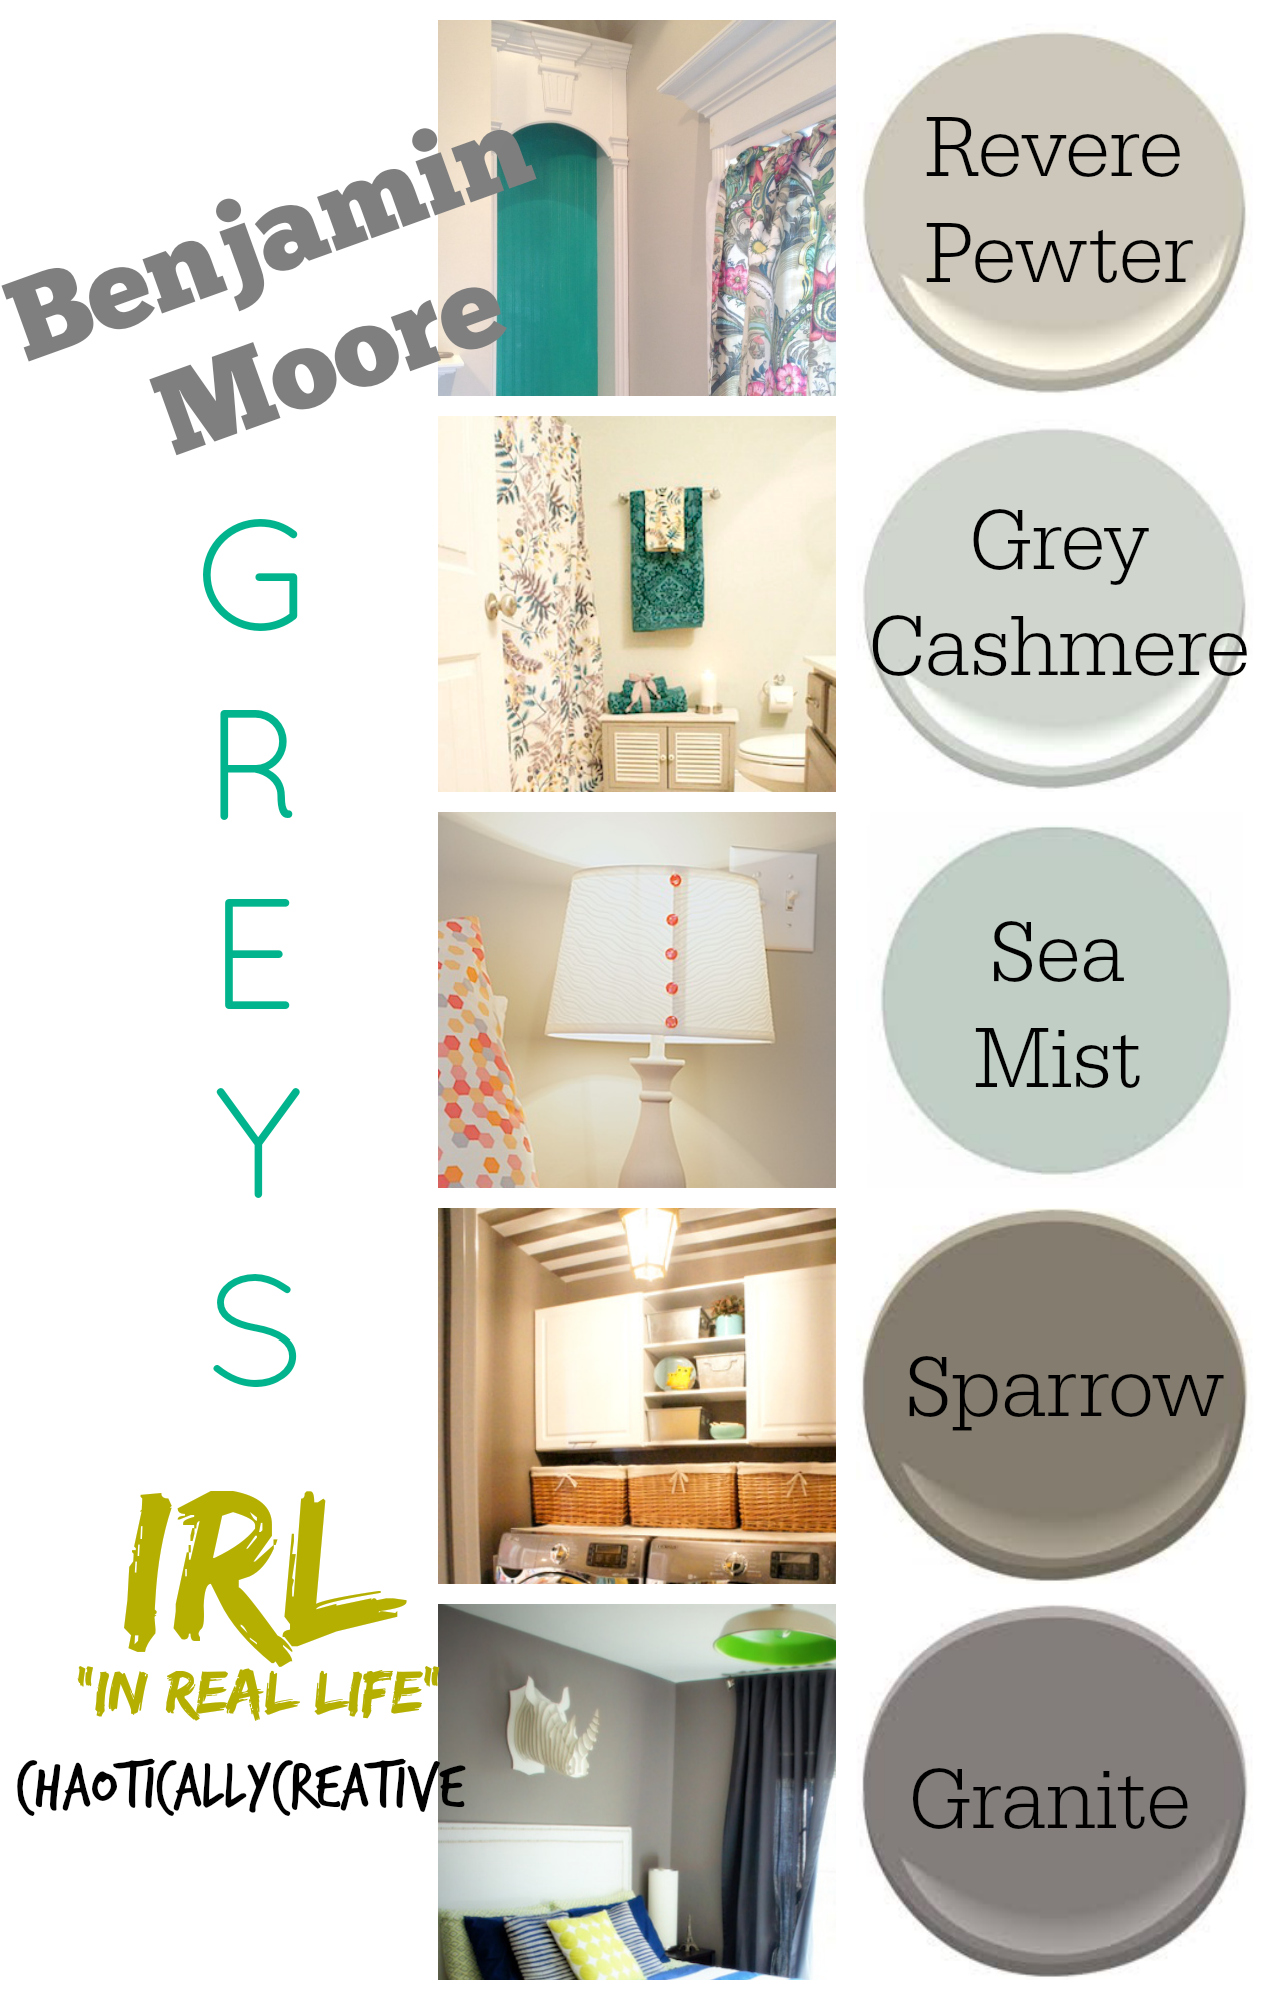 How to Match Colors From Photos to Real Life - Houzz